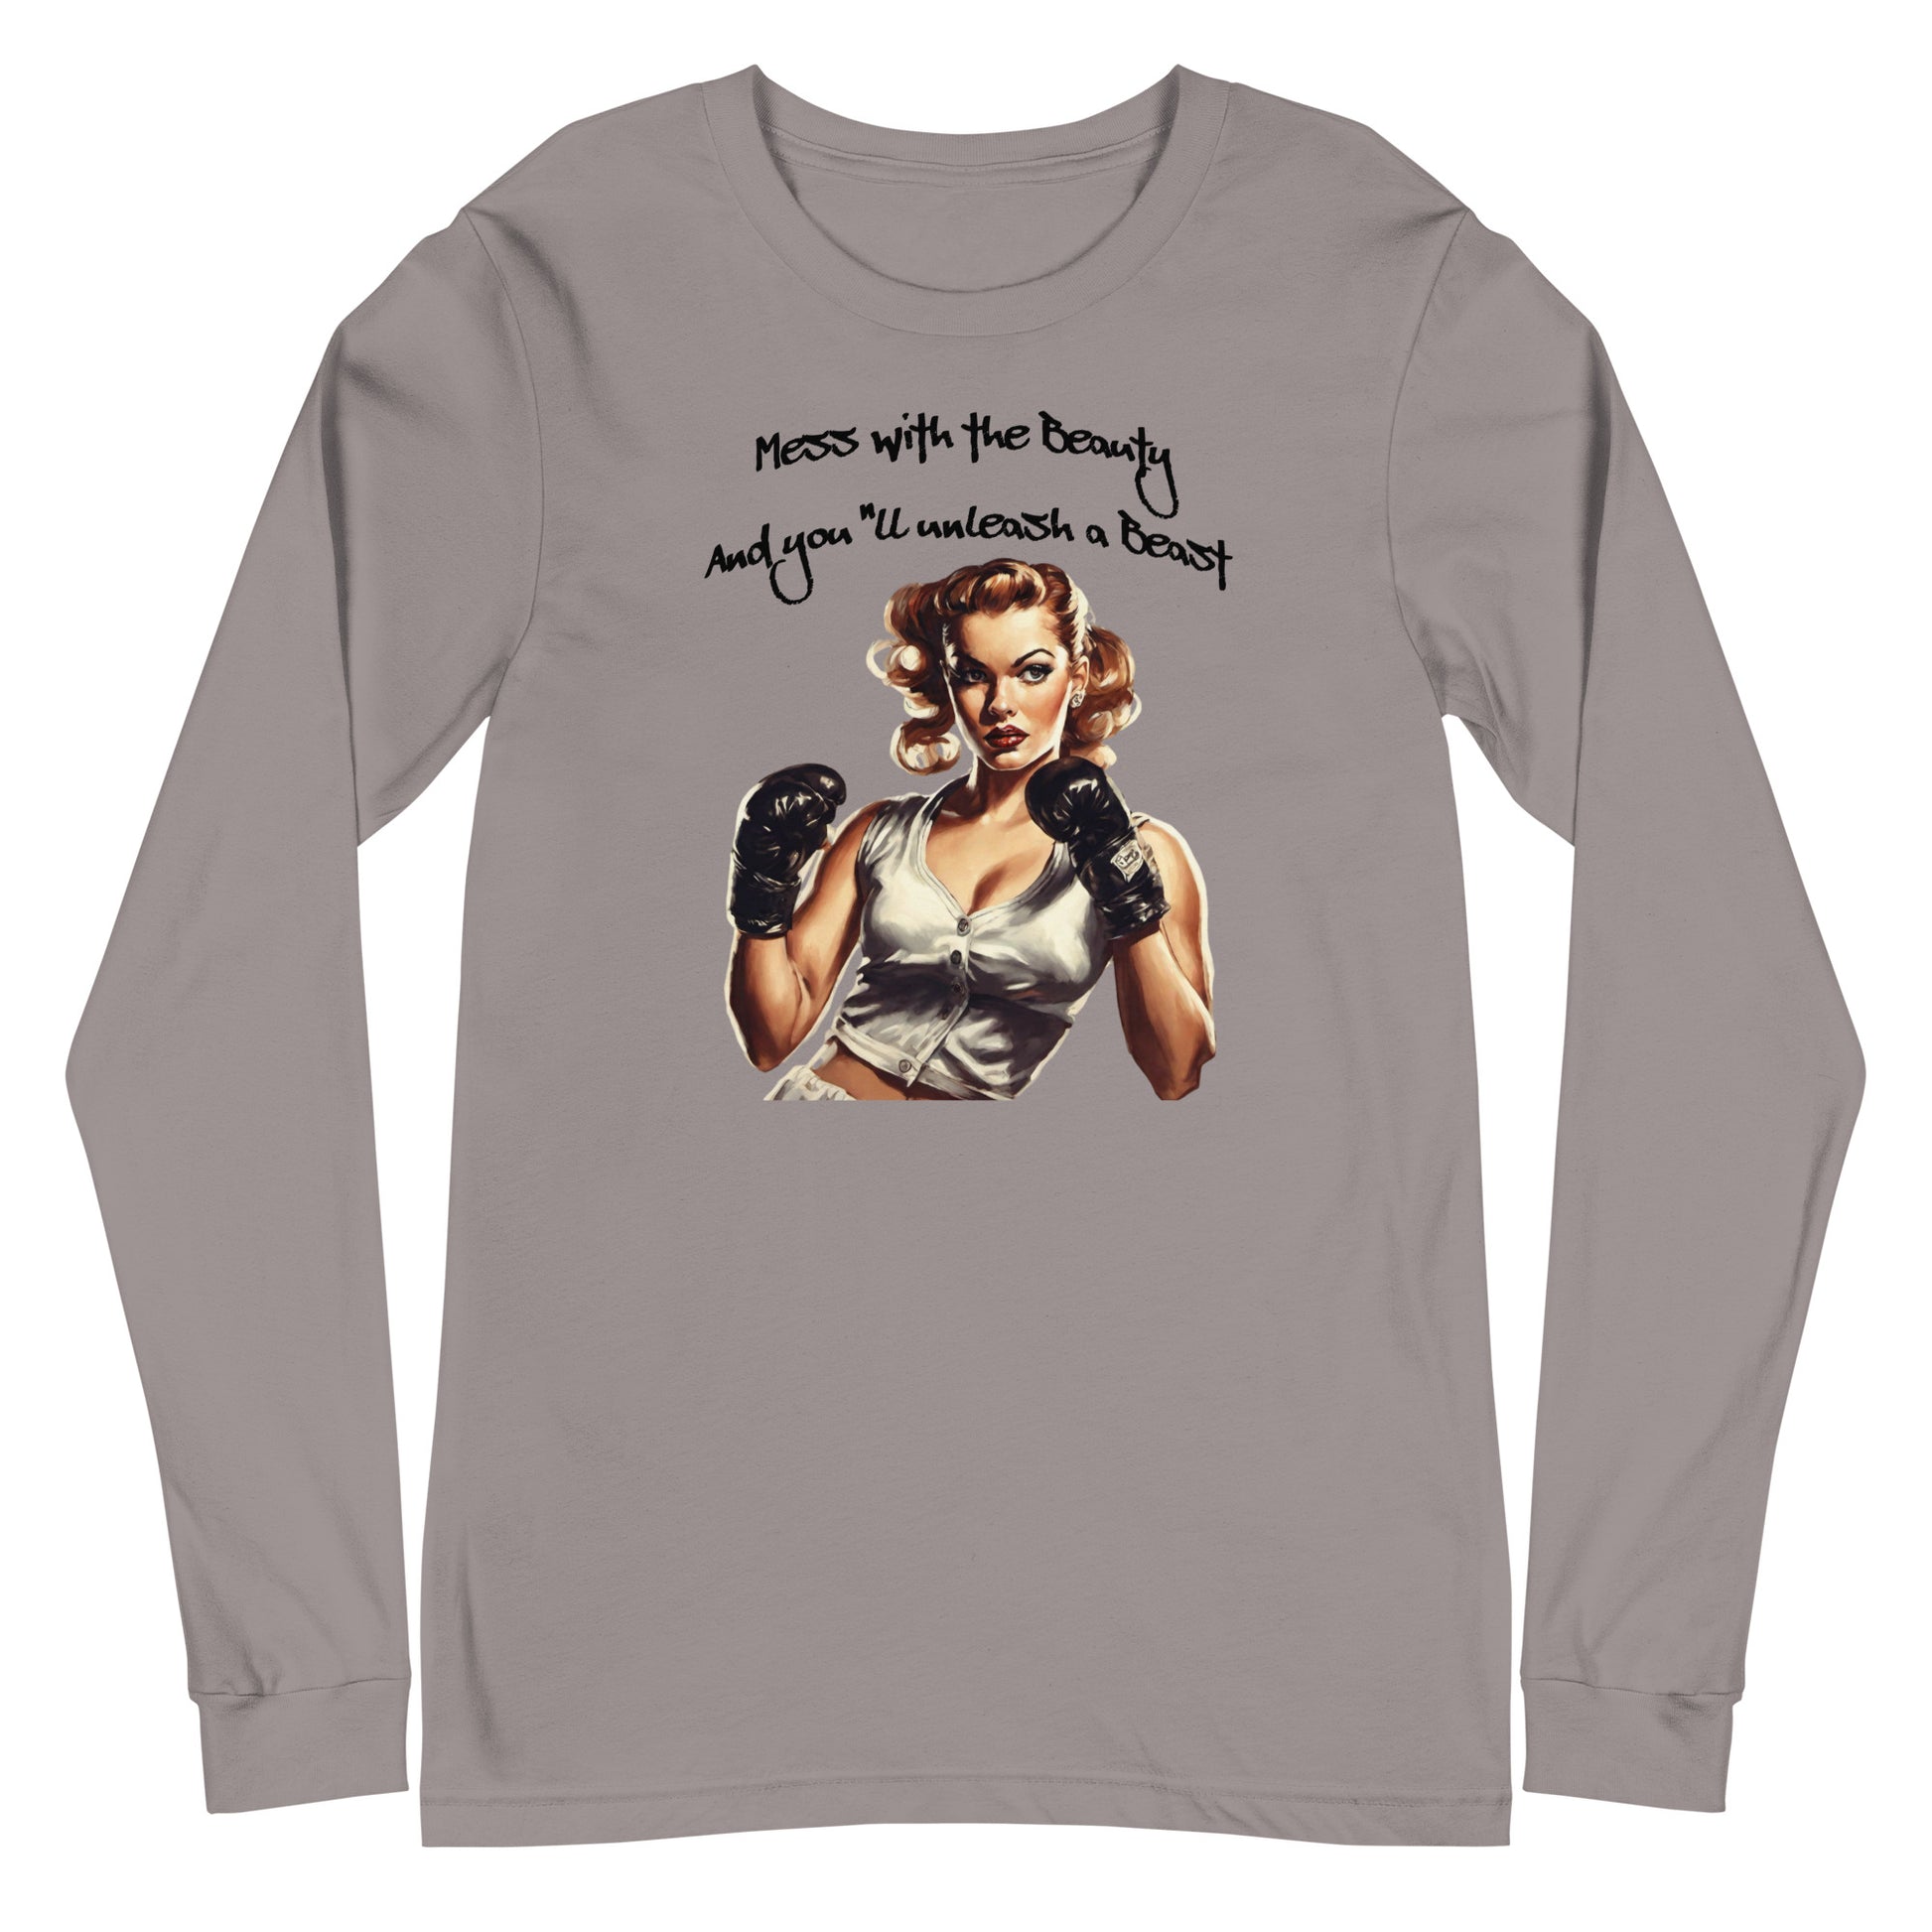 Mess with the Beauty, Unleash the Beast Women's Long Sleeve Tee Storm